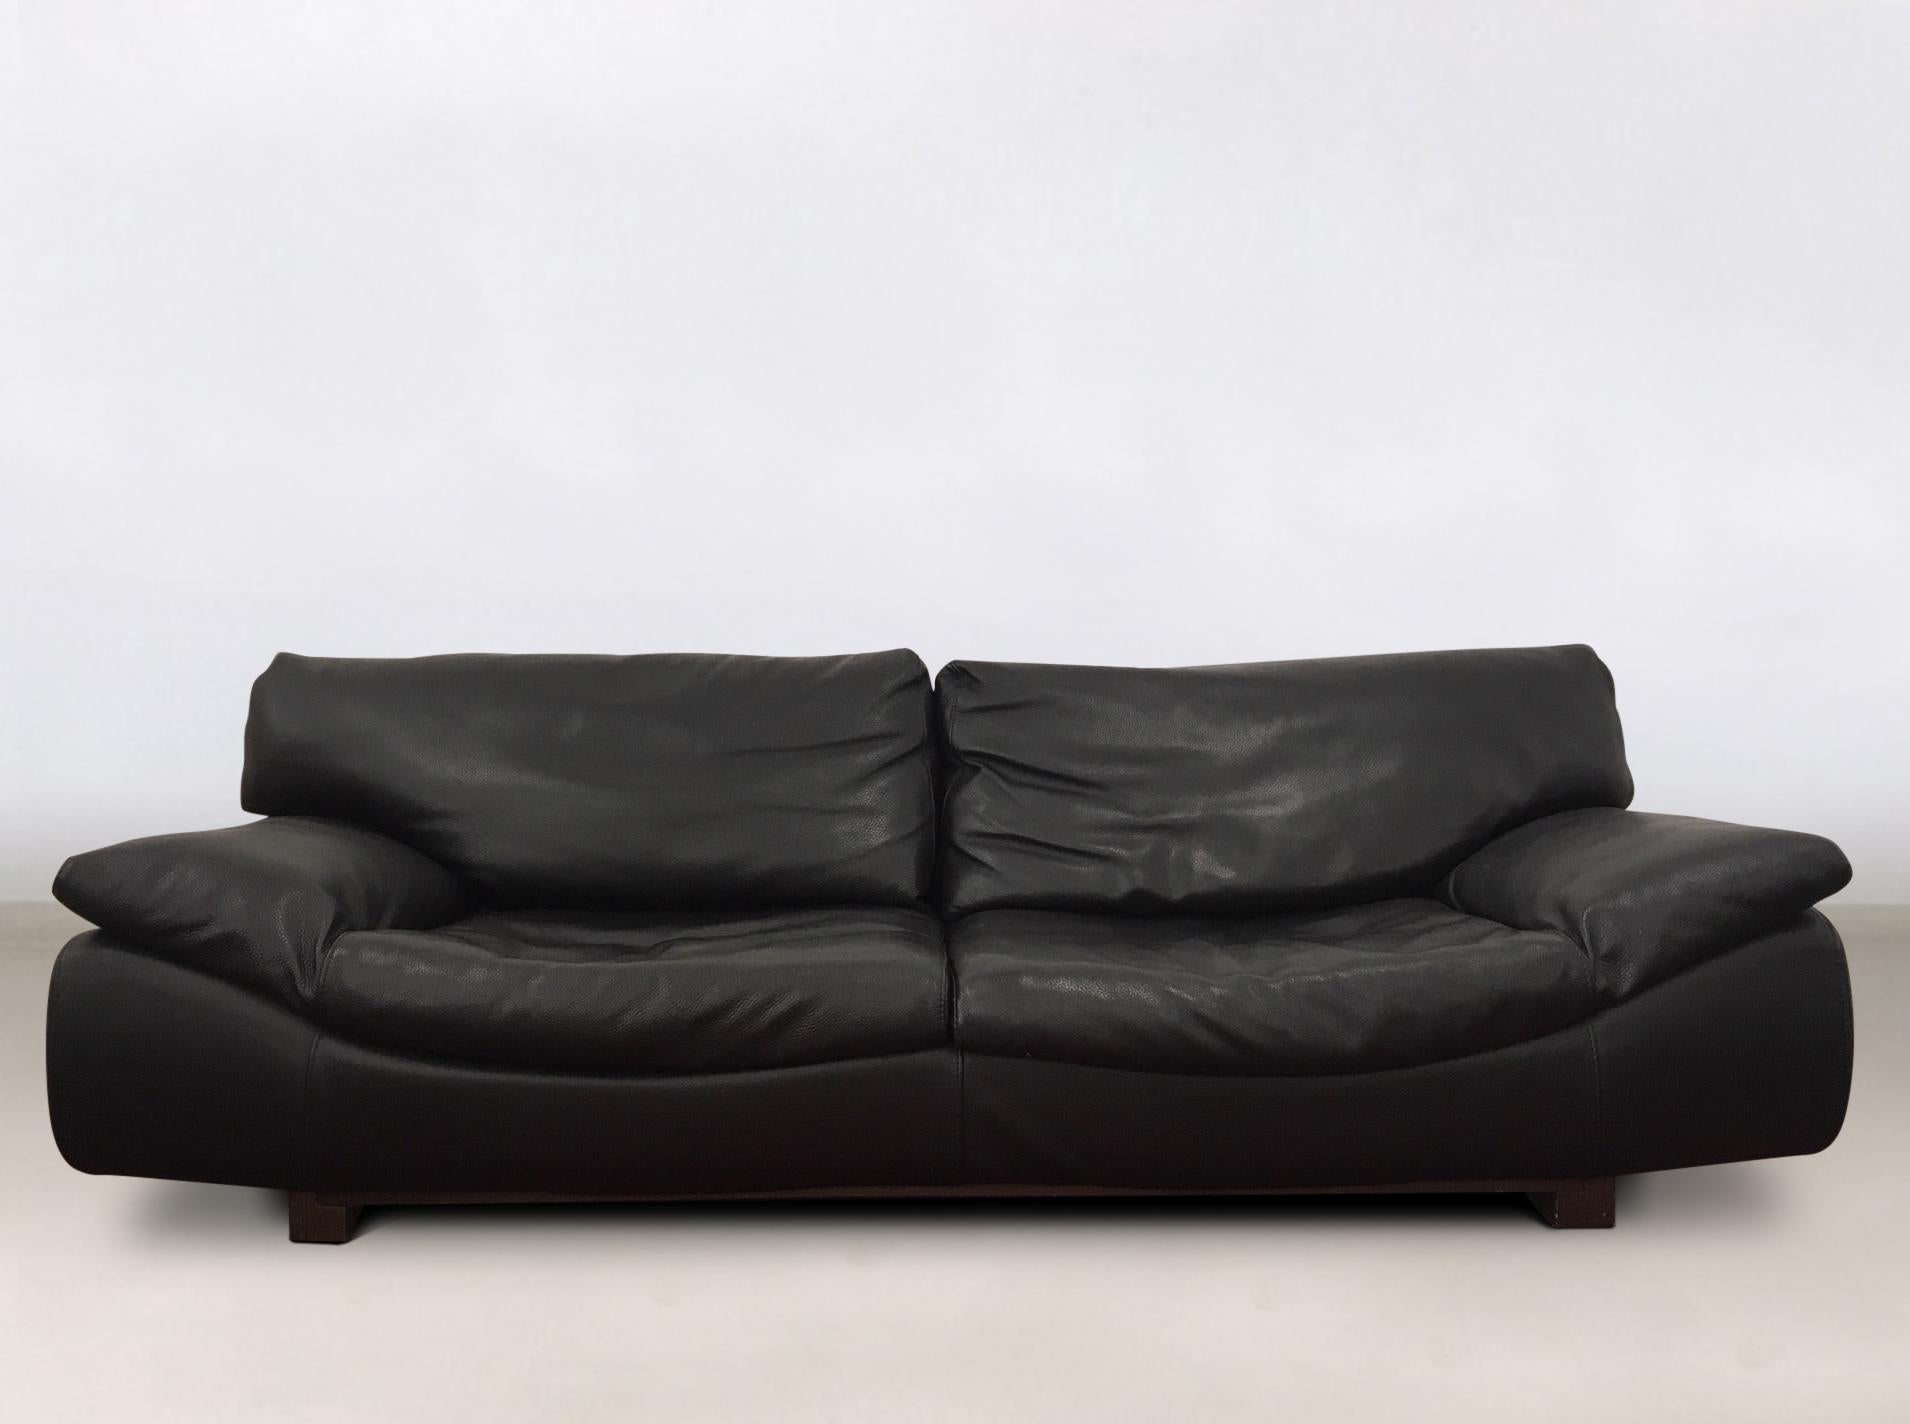 Gorgeous ensemble, consisting of a large sofa and two lounge chairs. All pieces feature a
thick black leather upholstery on a wooden base. Straps and zippers to remove parts or to keep parts to their place. The set remains in wonderful condition